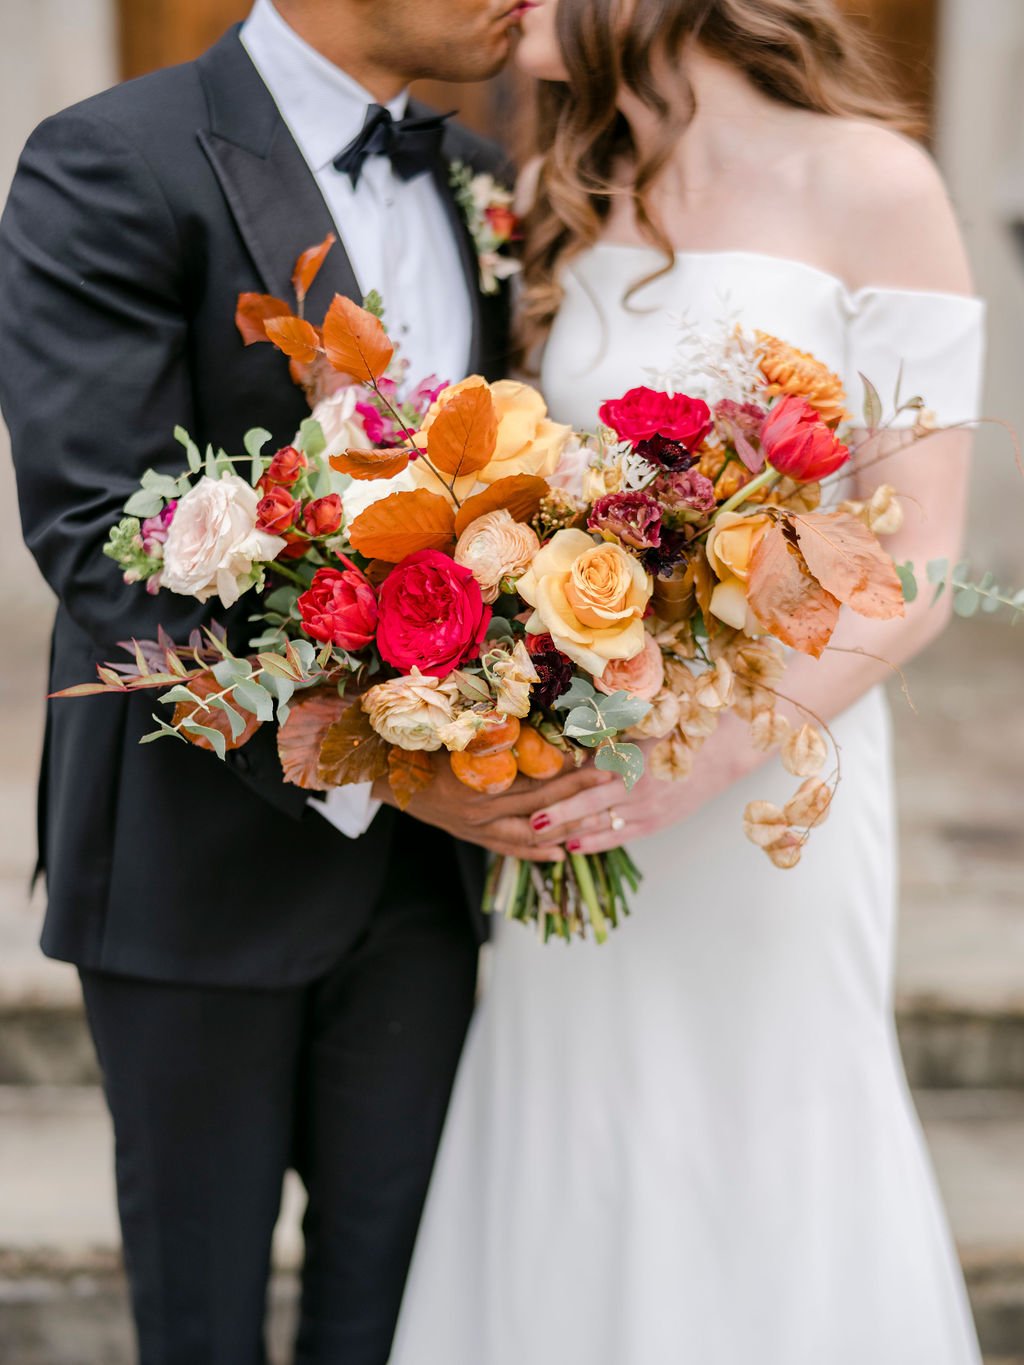 An elegant fall bridal bouquet filled with vibrant red, cream, terra cotta, and burnt orange florals. The bouquet features roses, tulips, carnations, eucalyptus, and dried floral accents. Design by Rosemary and Finch in Nashville, TN.